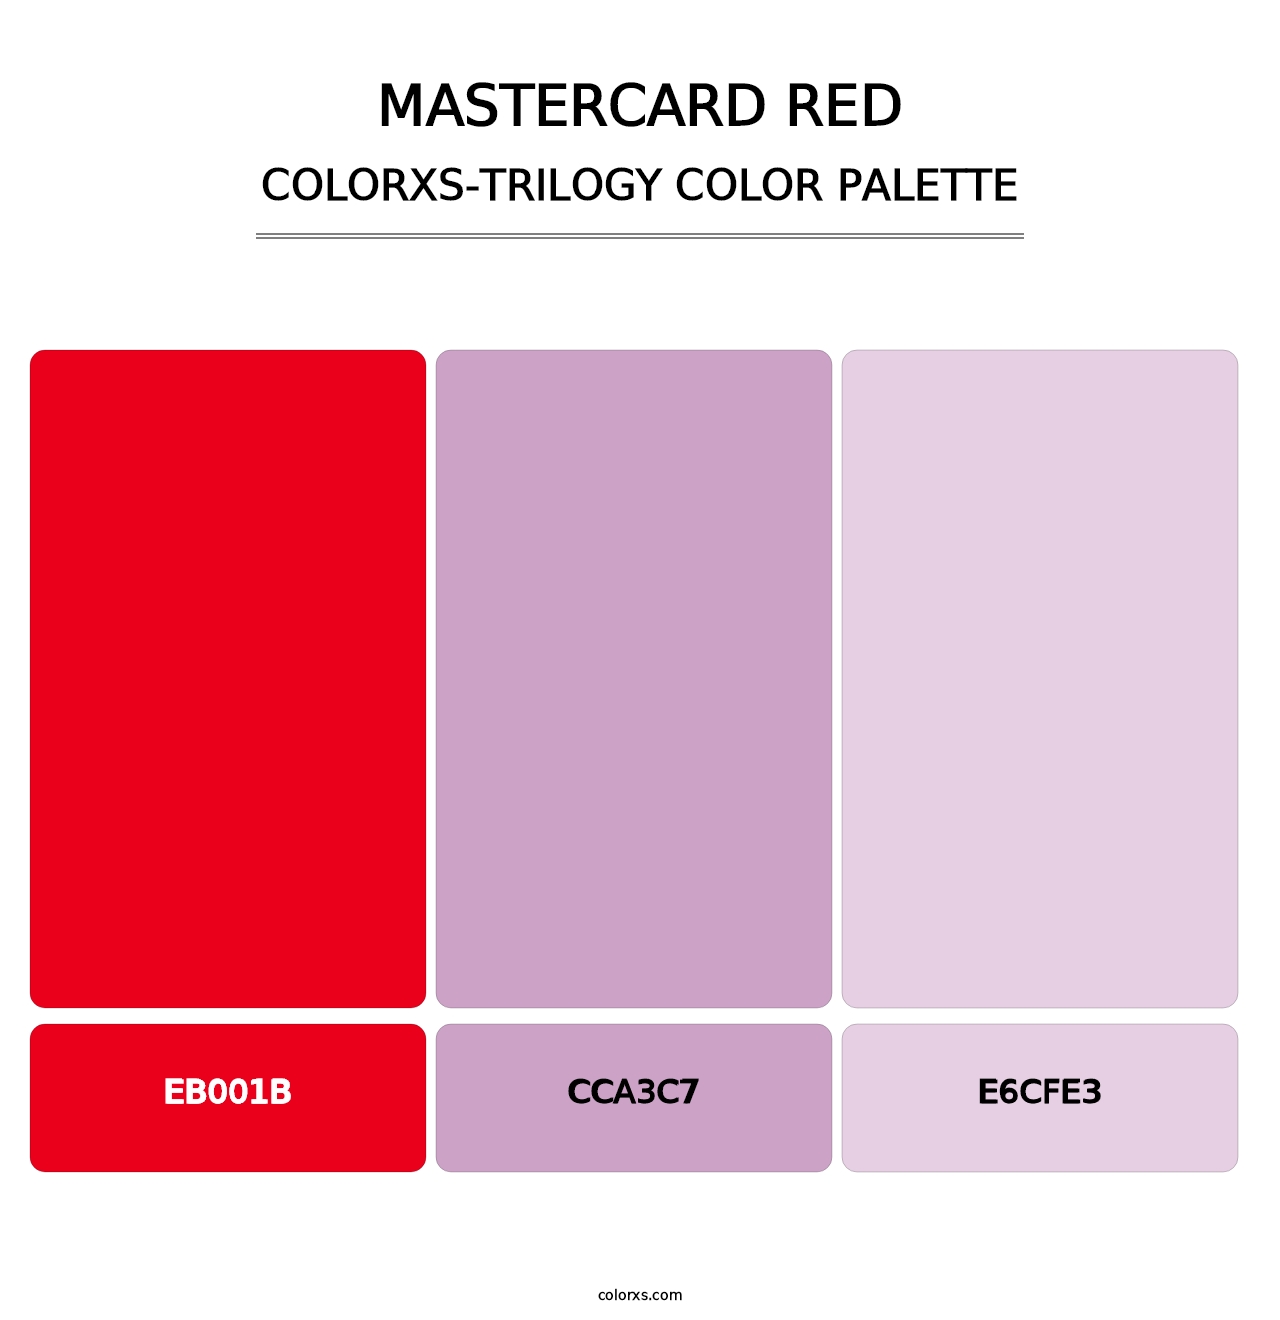 Mastercard Red - Colorxs Trilogy Palette